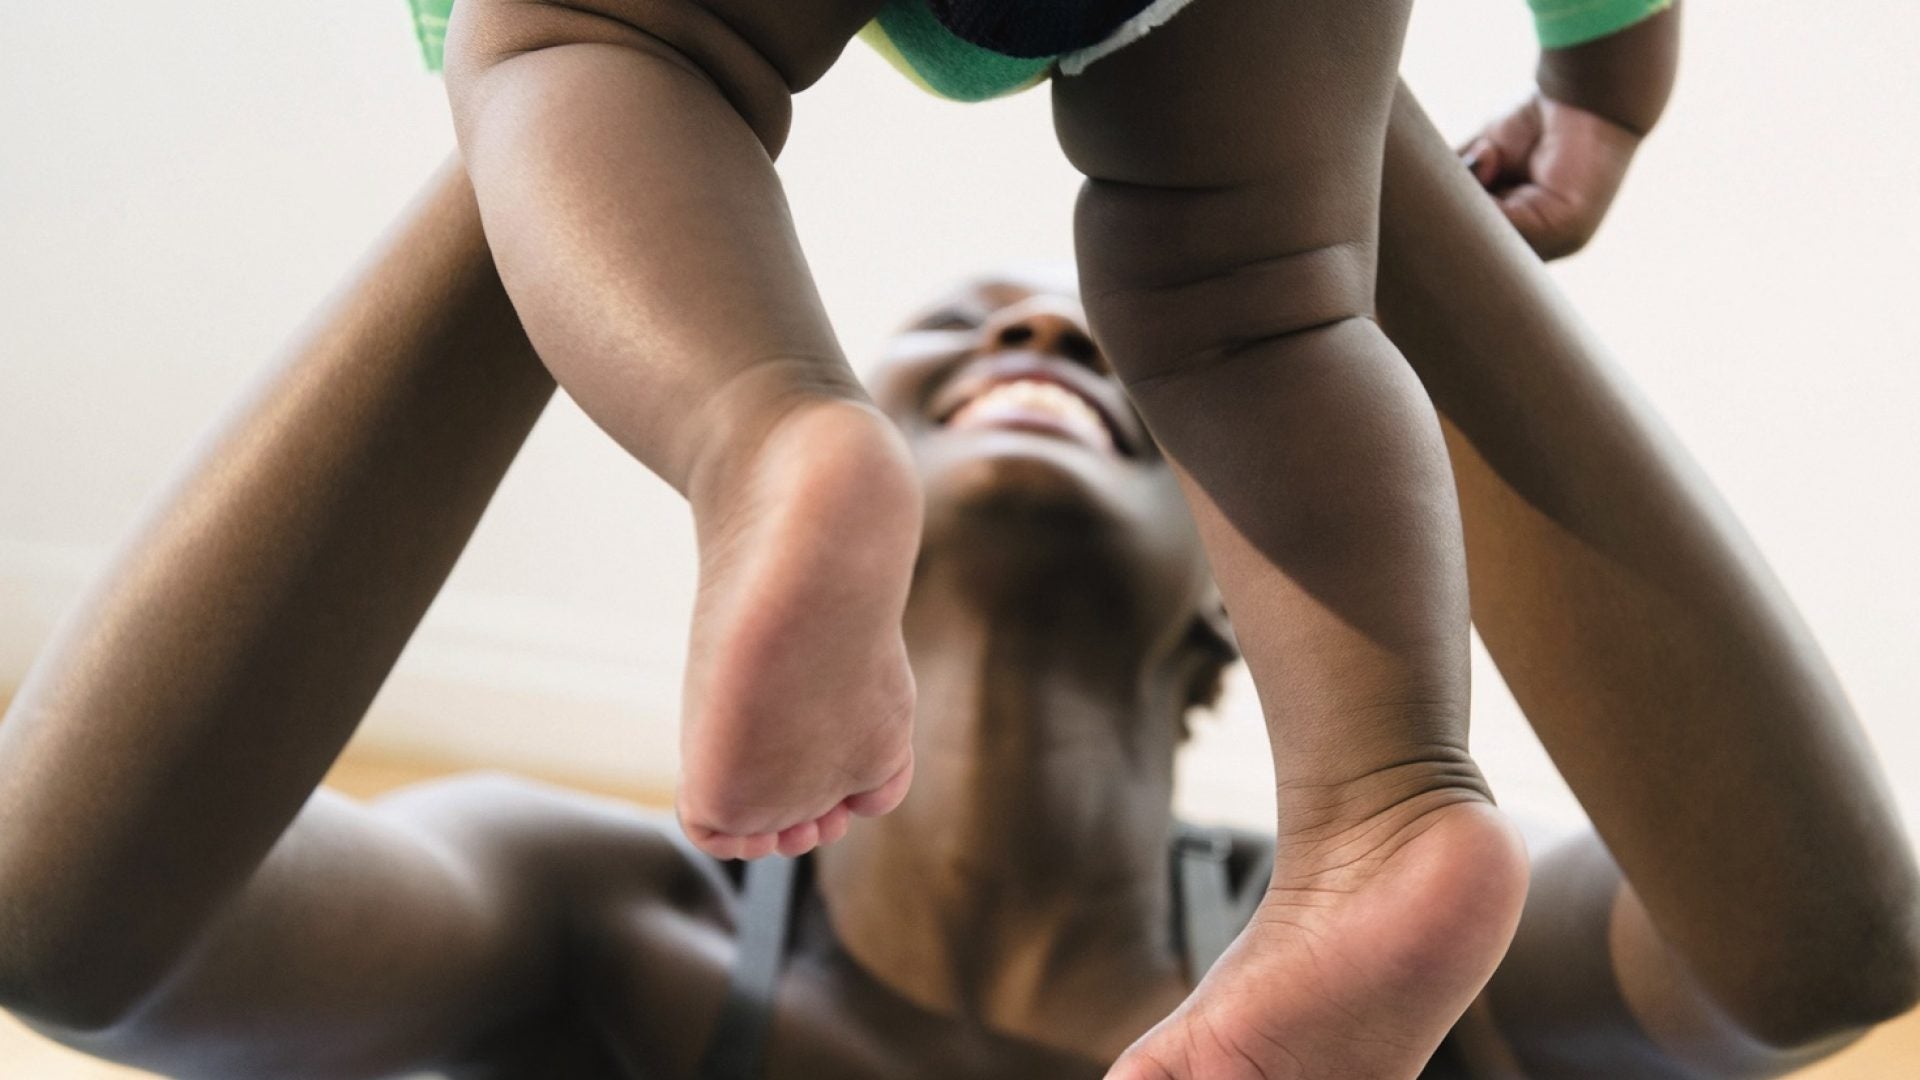 So You're Ready To Be A Mom? Here's Four Ways To Get Your Body Ready